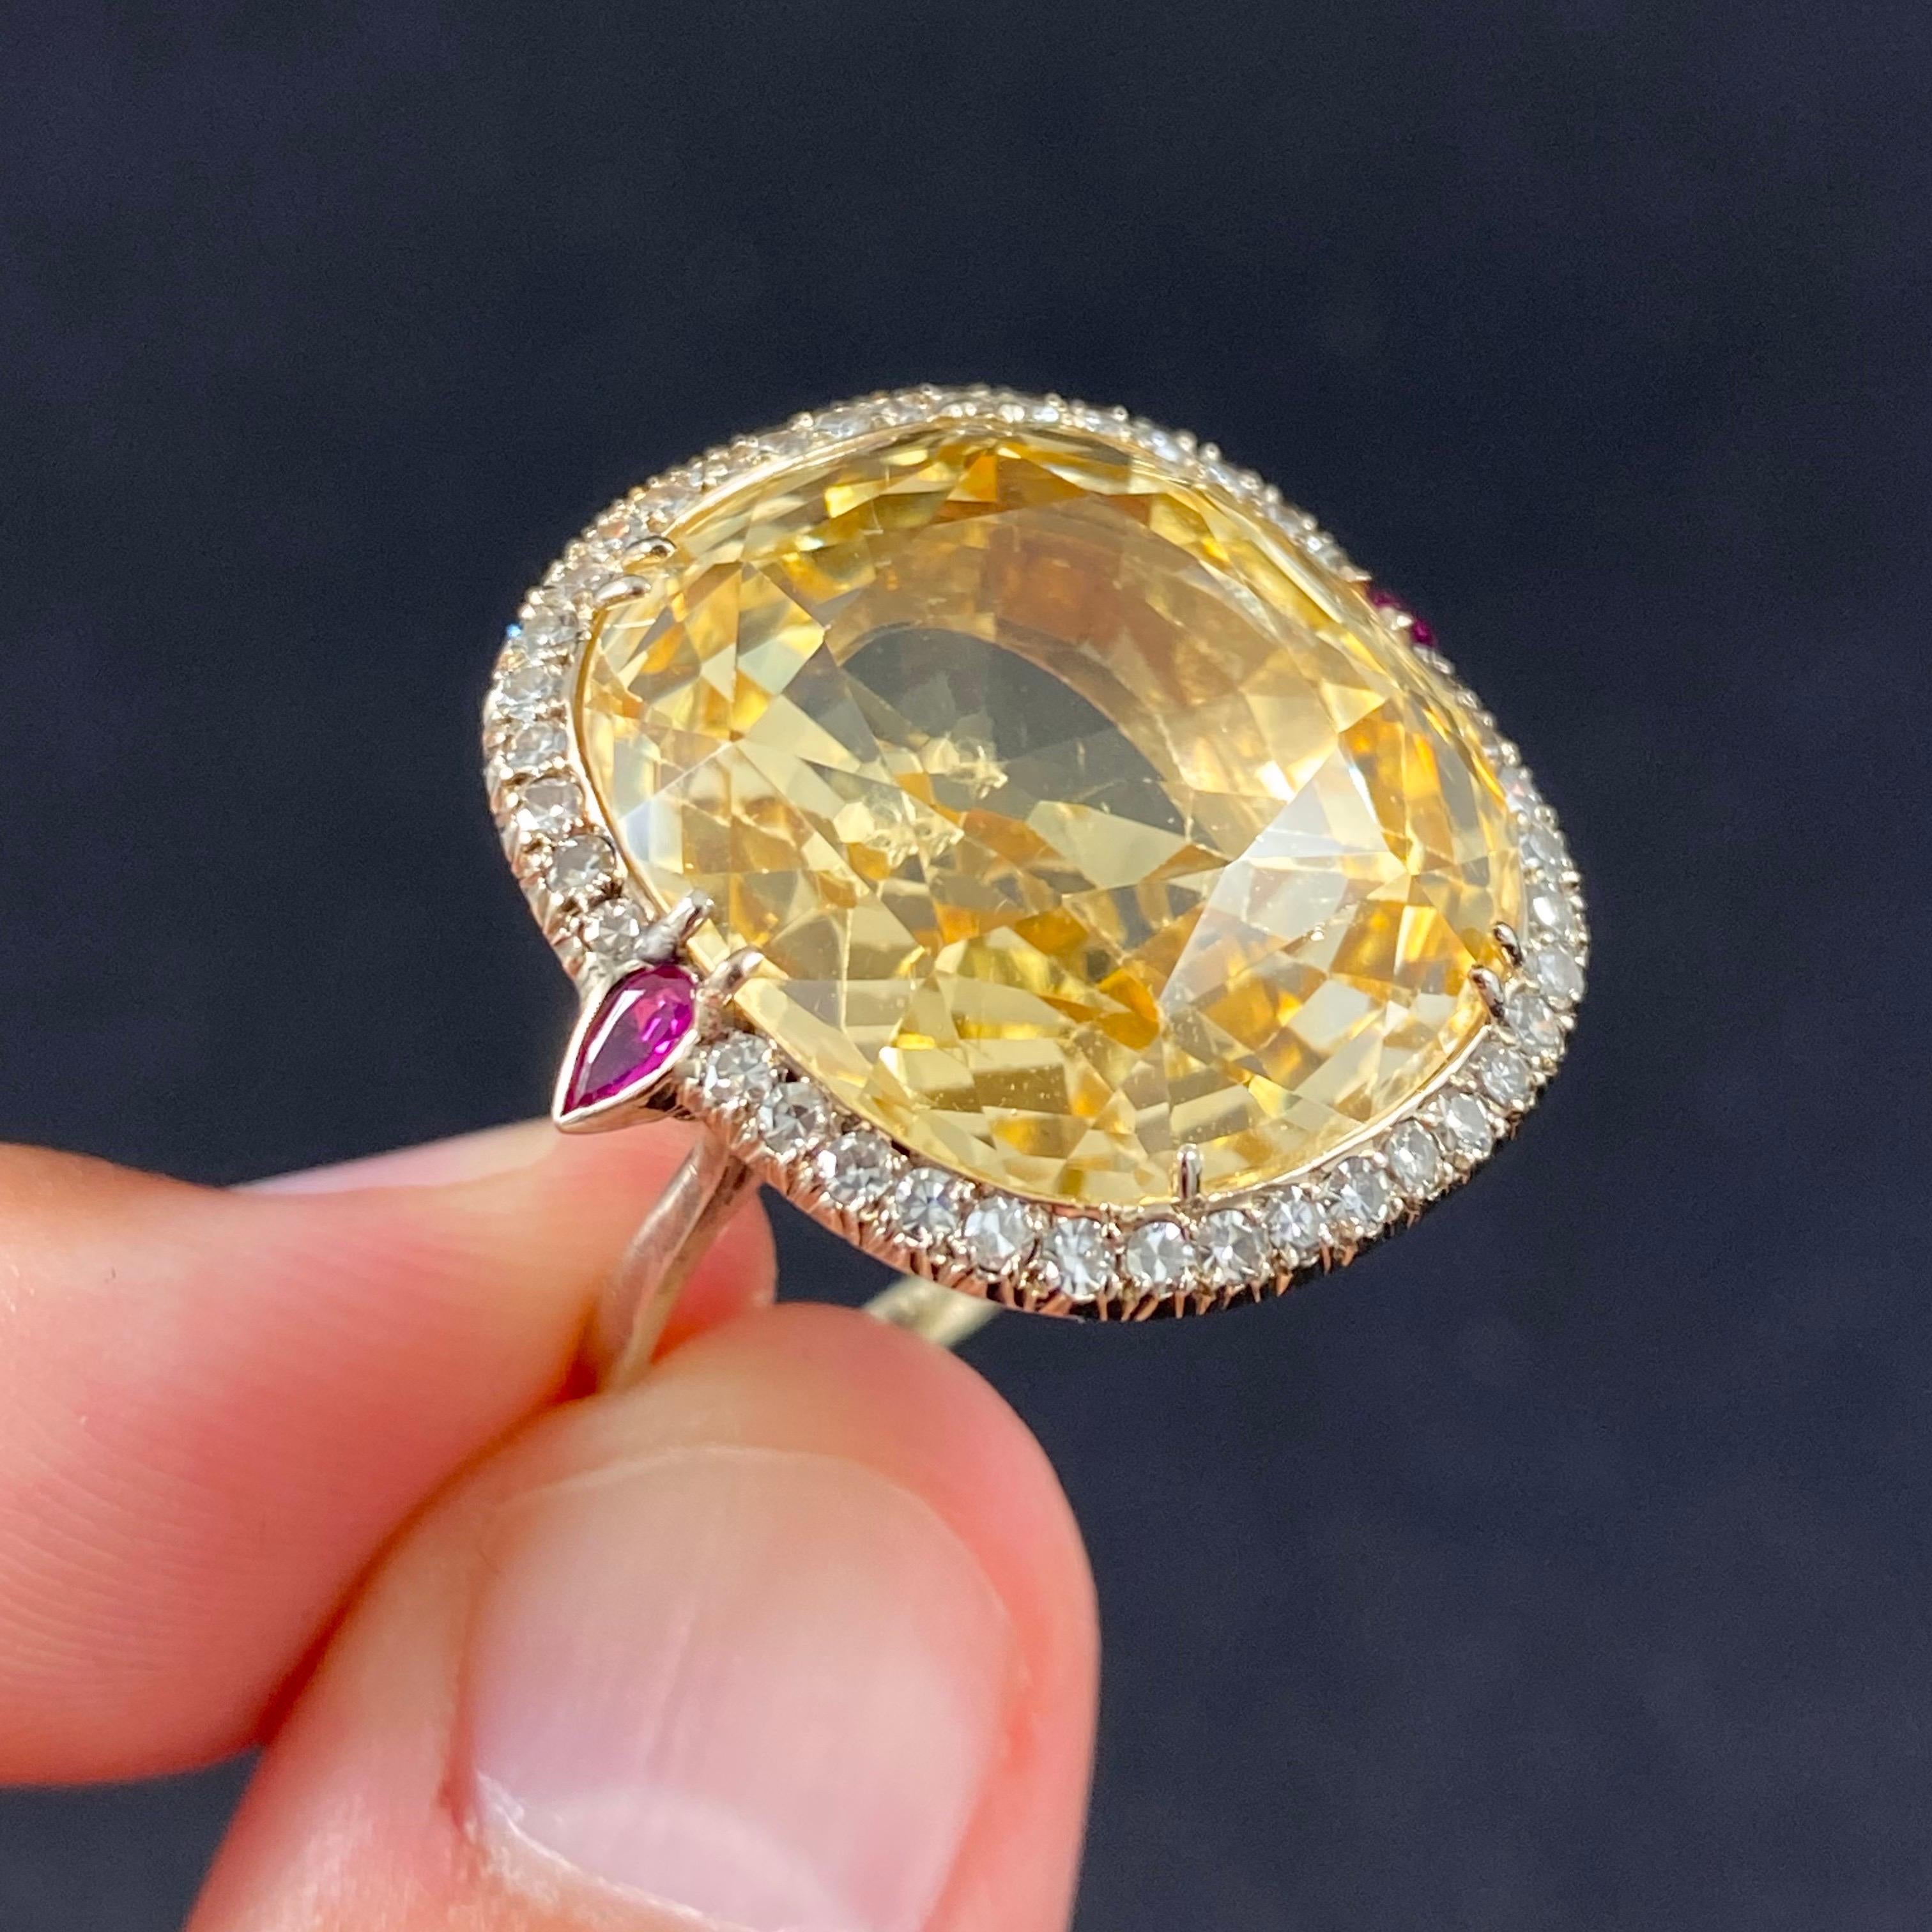 Certified 40 Carat Natural Unheated Ceylon Yellow Sapphire Diamond Cocktail Ring For Sale 1